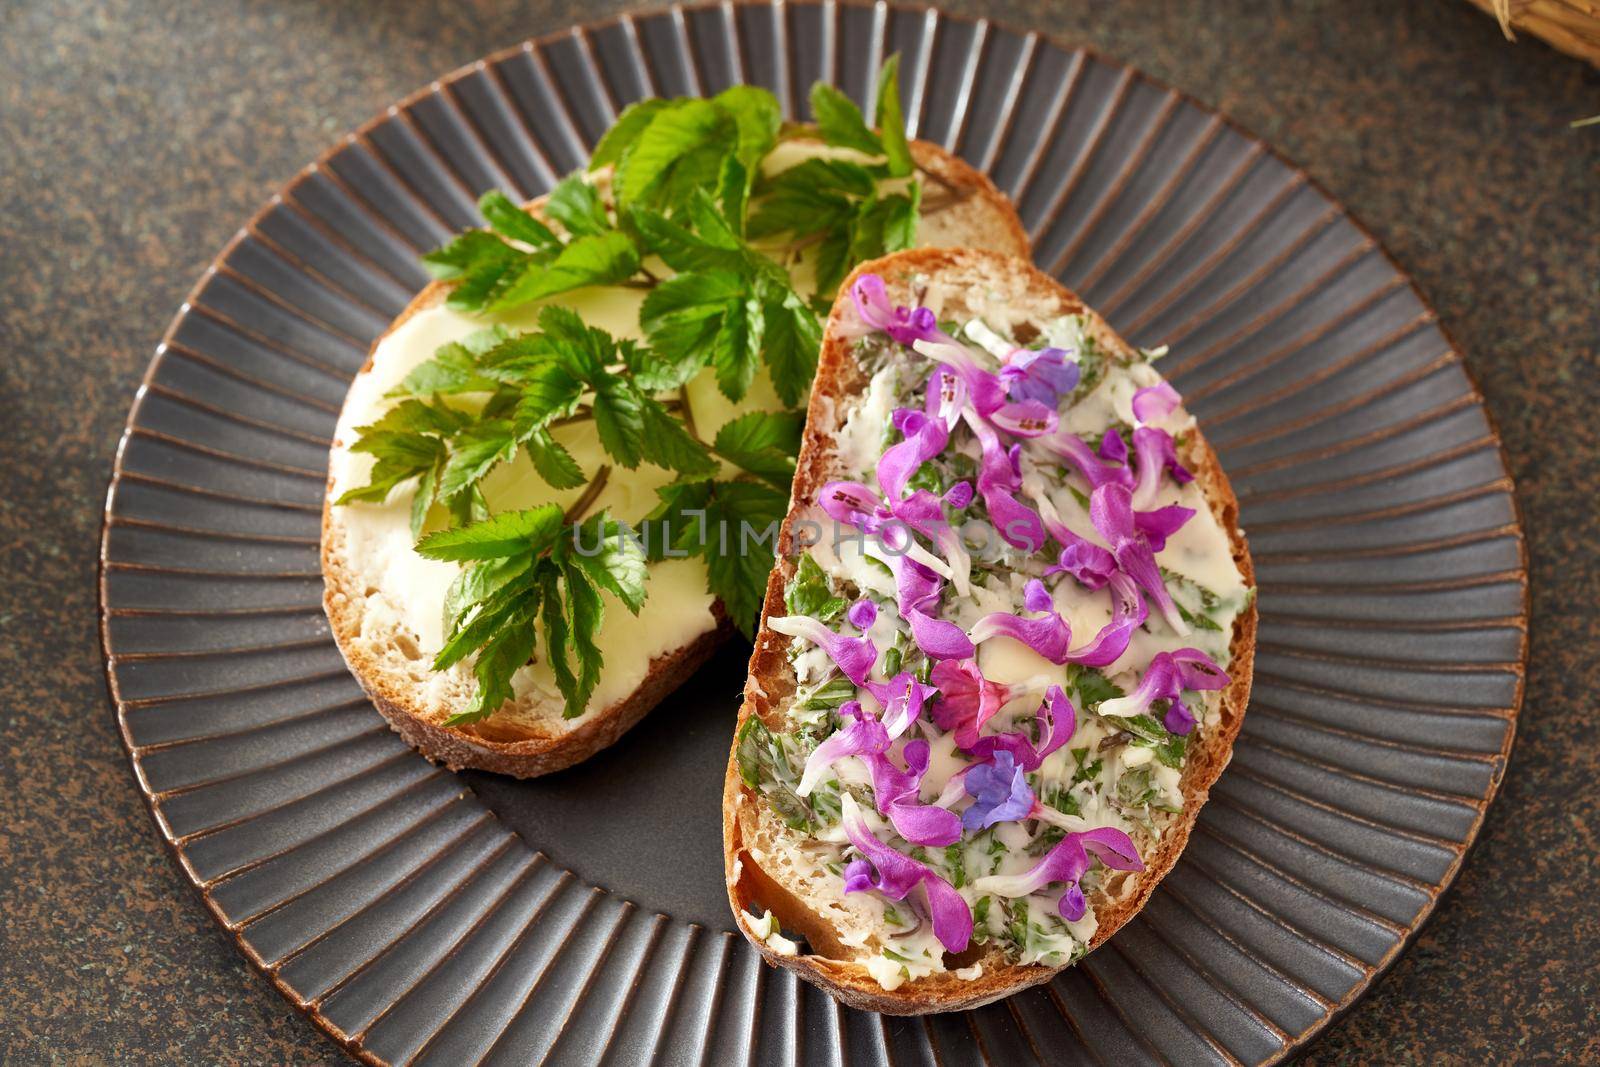 Two slices of bread with wild edible spring plants - goutweed leaves, purple dead-nettle and lungwort flo by madeleine_steinbach